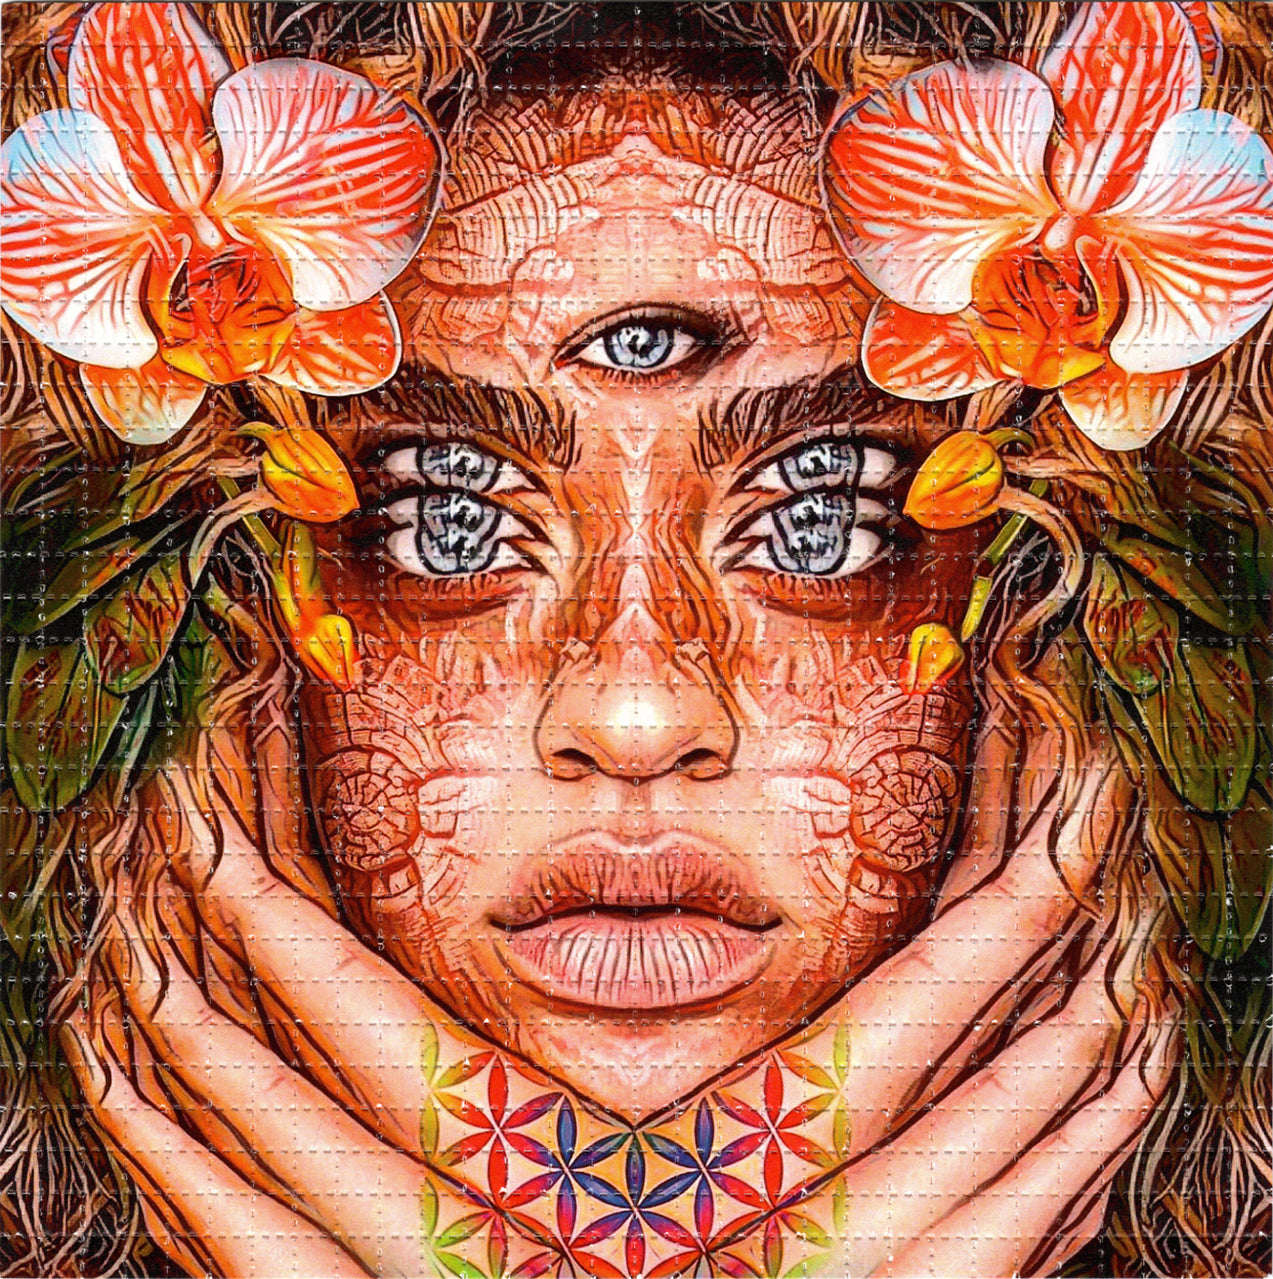 Orchid Priestess by Zack Prestage SIGNED Limited Edition LSD blotter art print